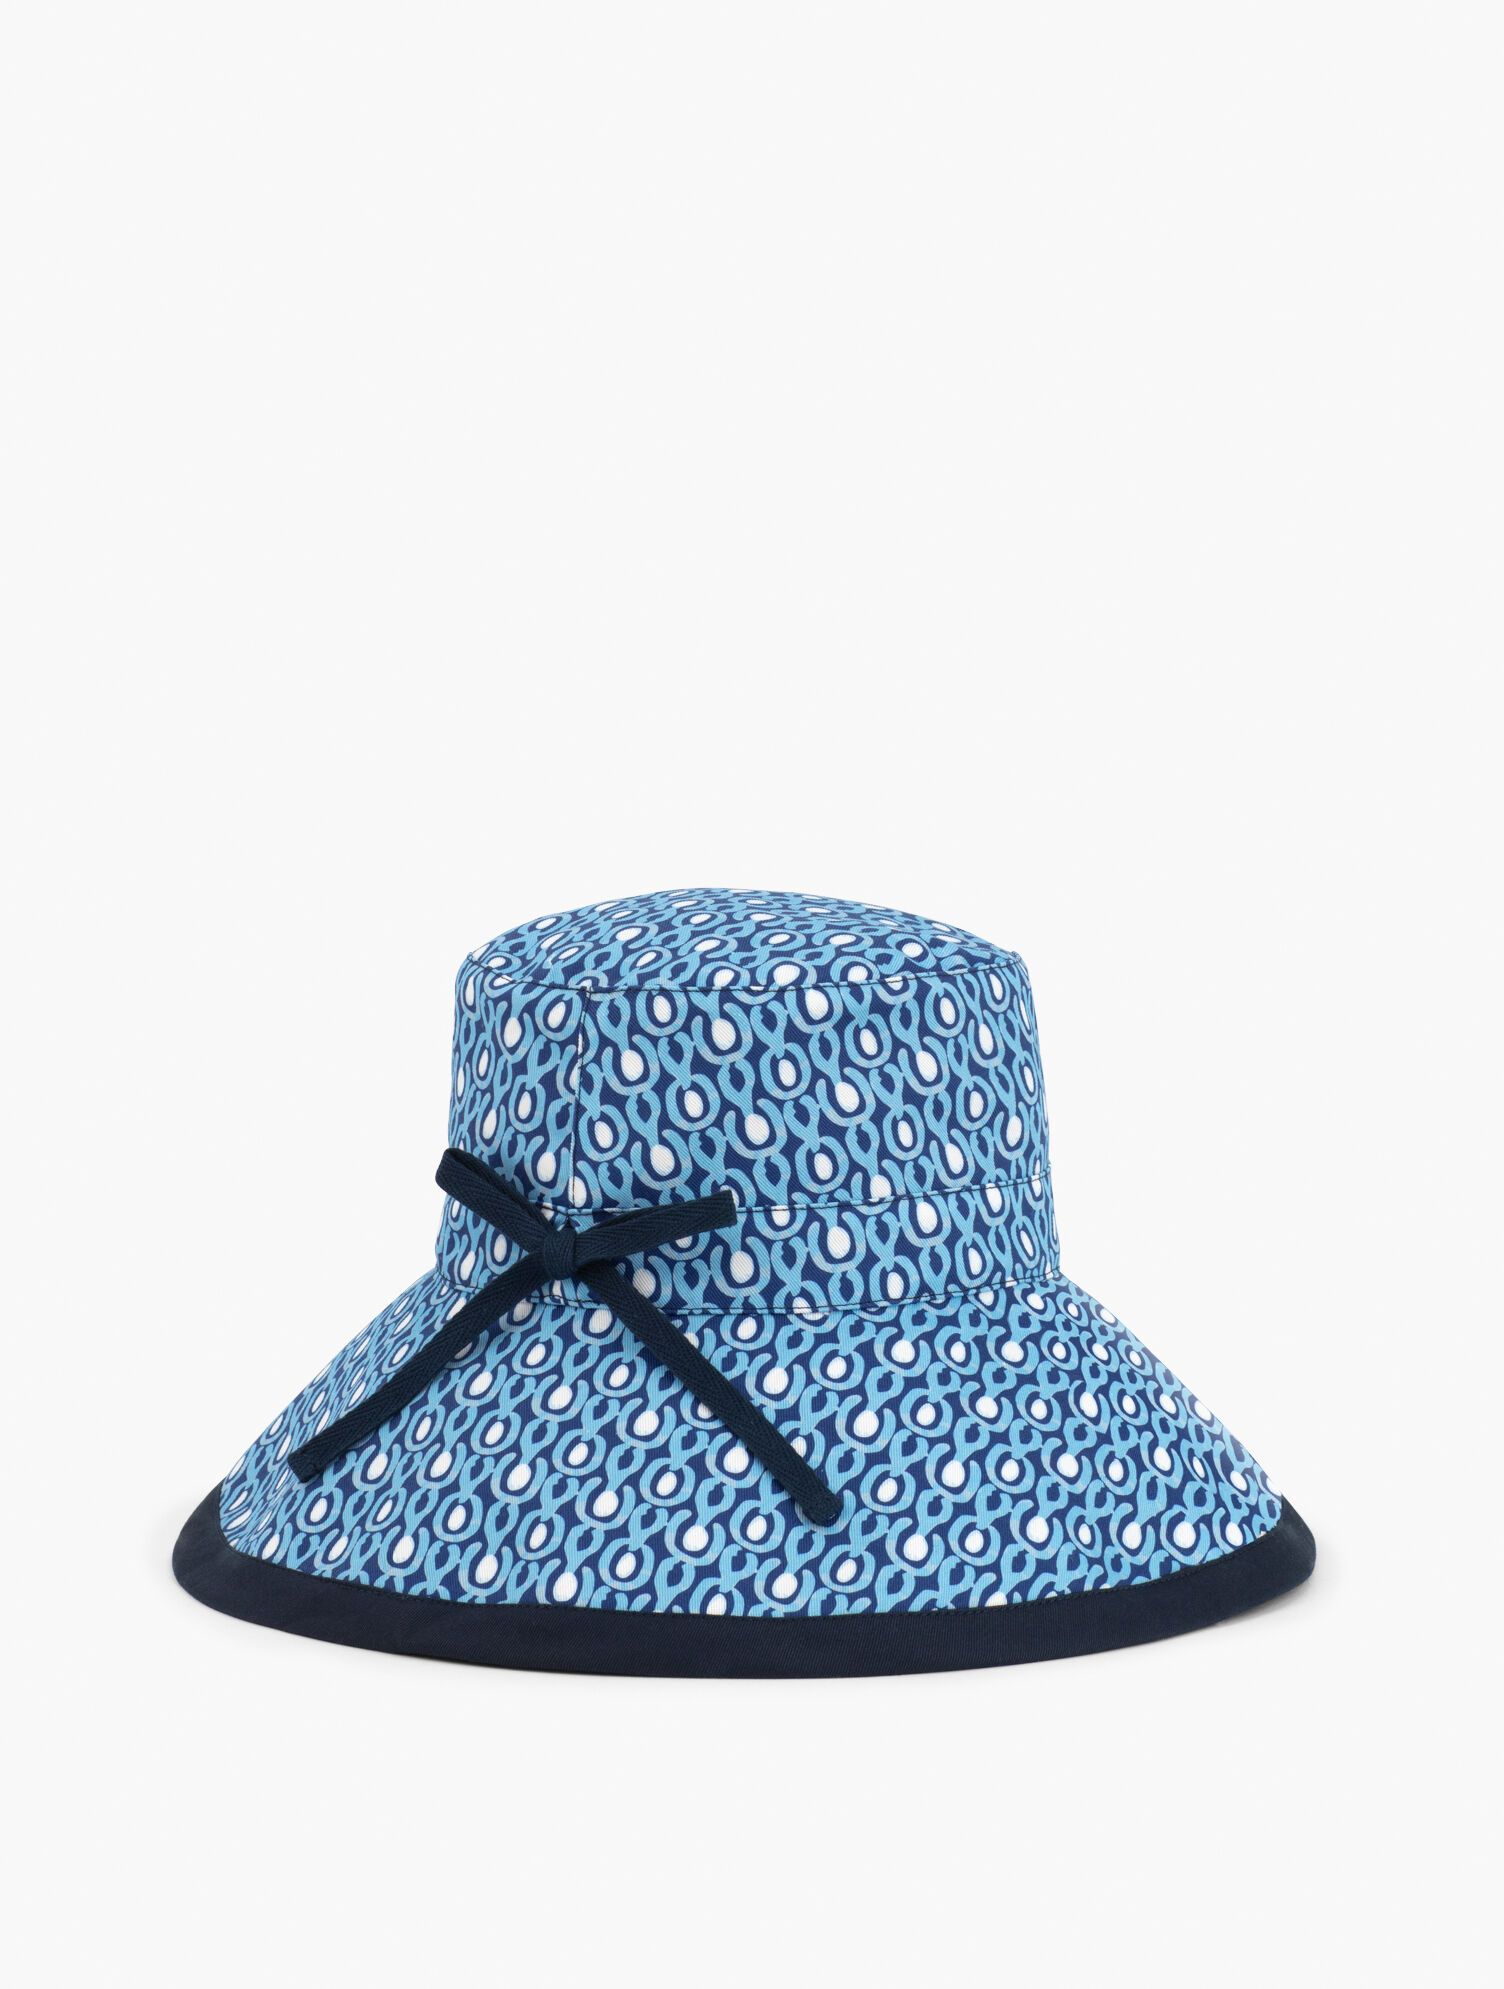 Packable Printed Hat | Talbots